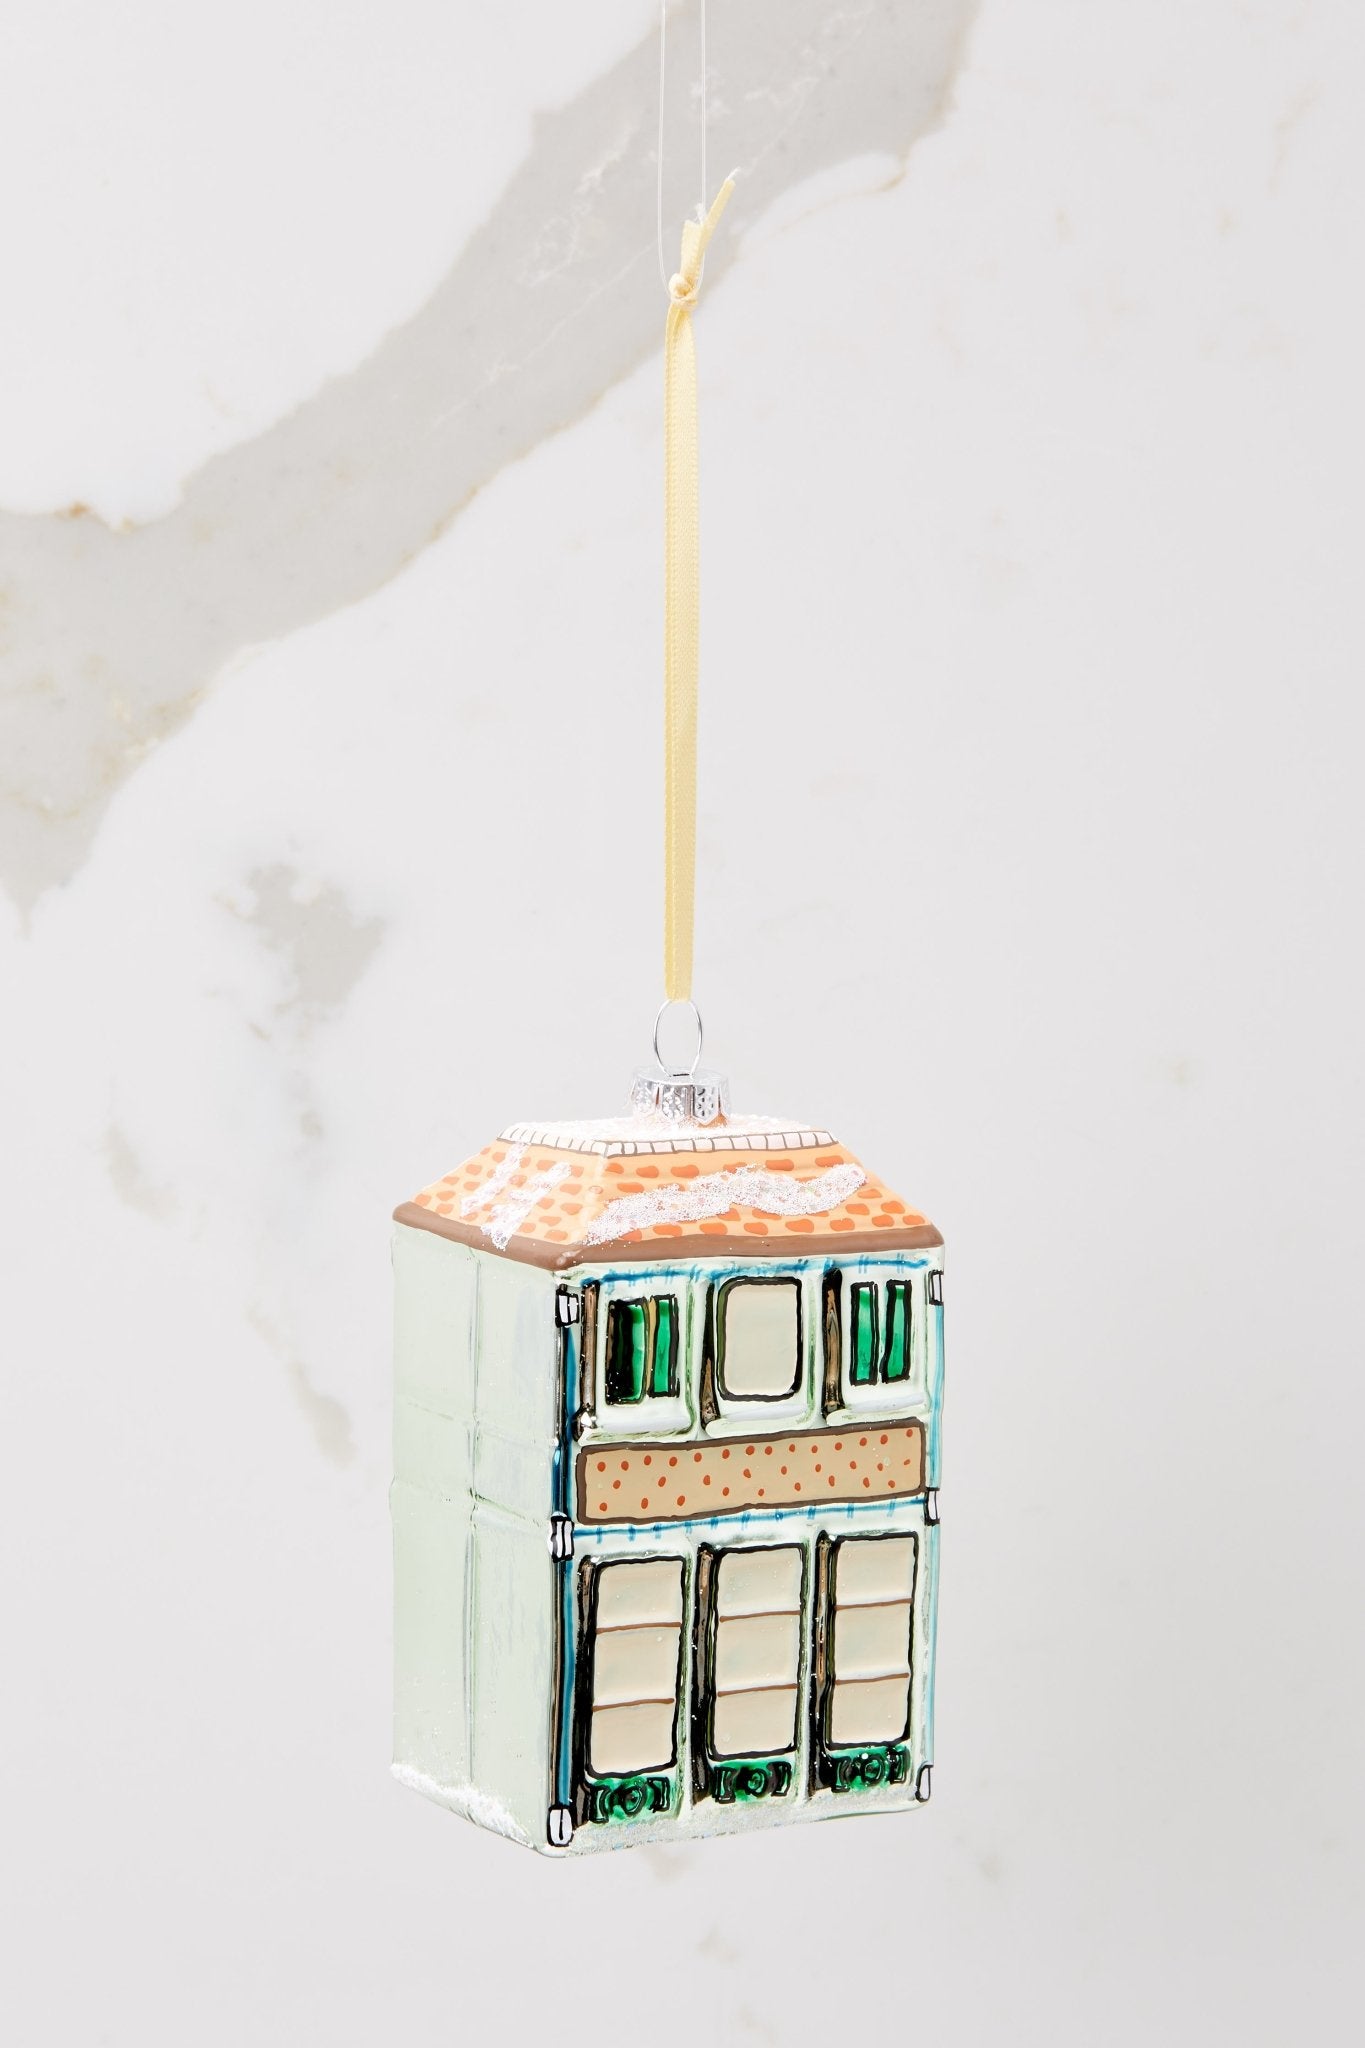 Back view of this ornament that features a building shape that says "BOOK SHOP" and has a cat in one of the windows.